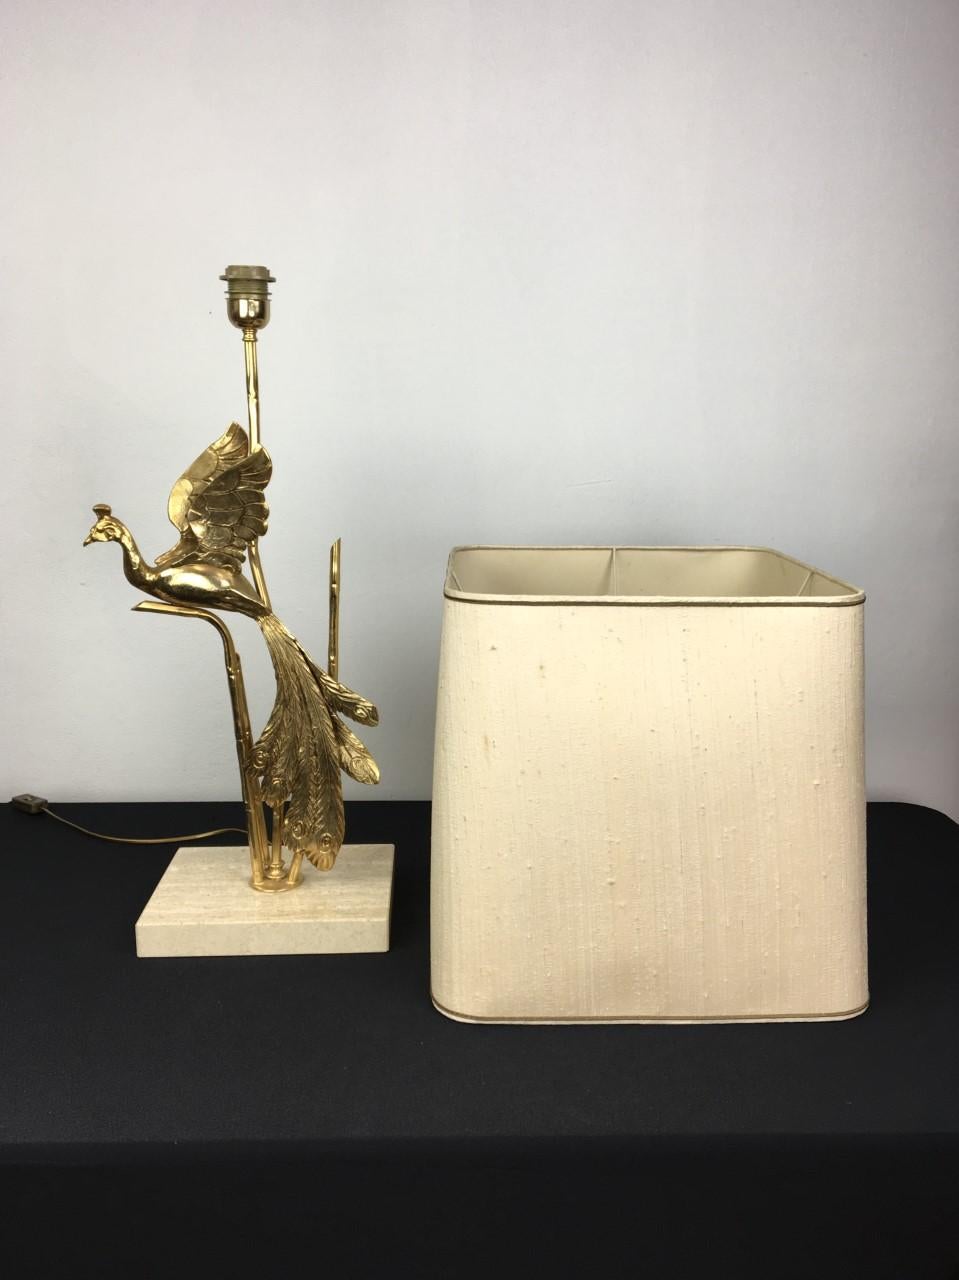 Peacock Table Lamp by Lanciotto for L'Originale, Italy, 1970s For Sale 8